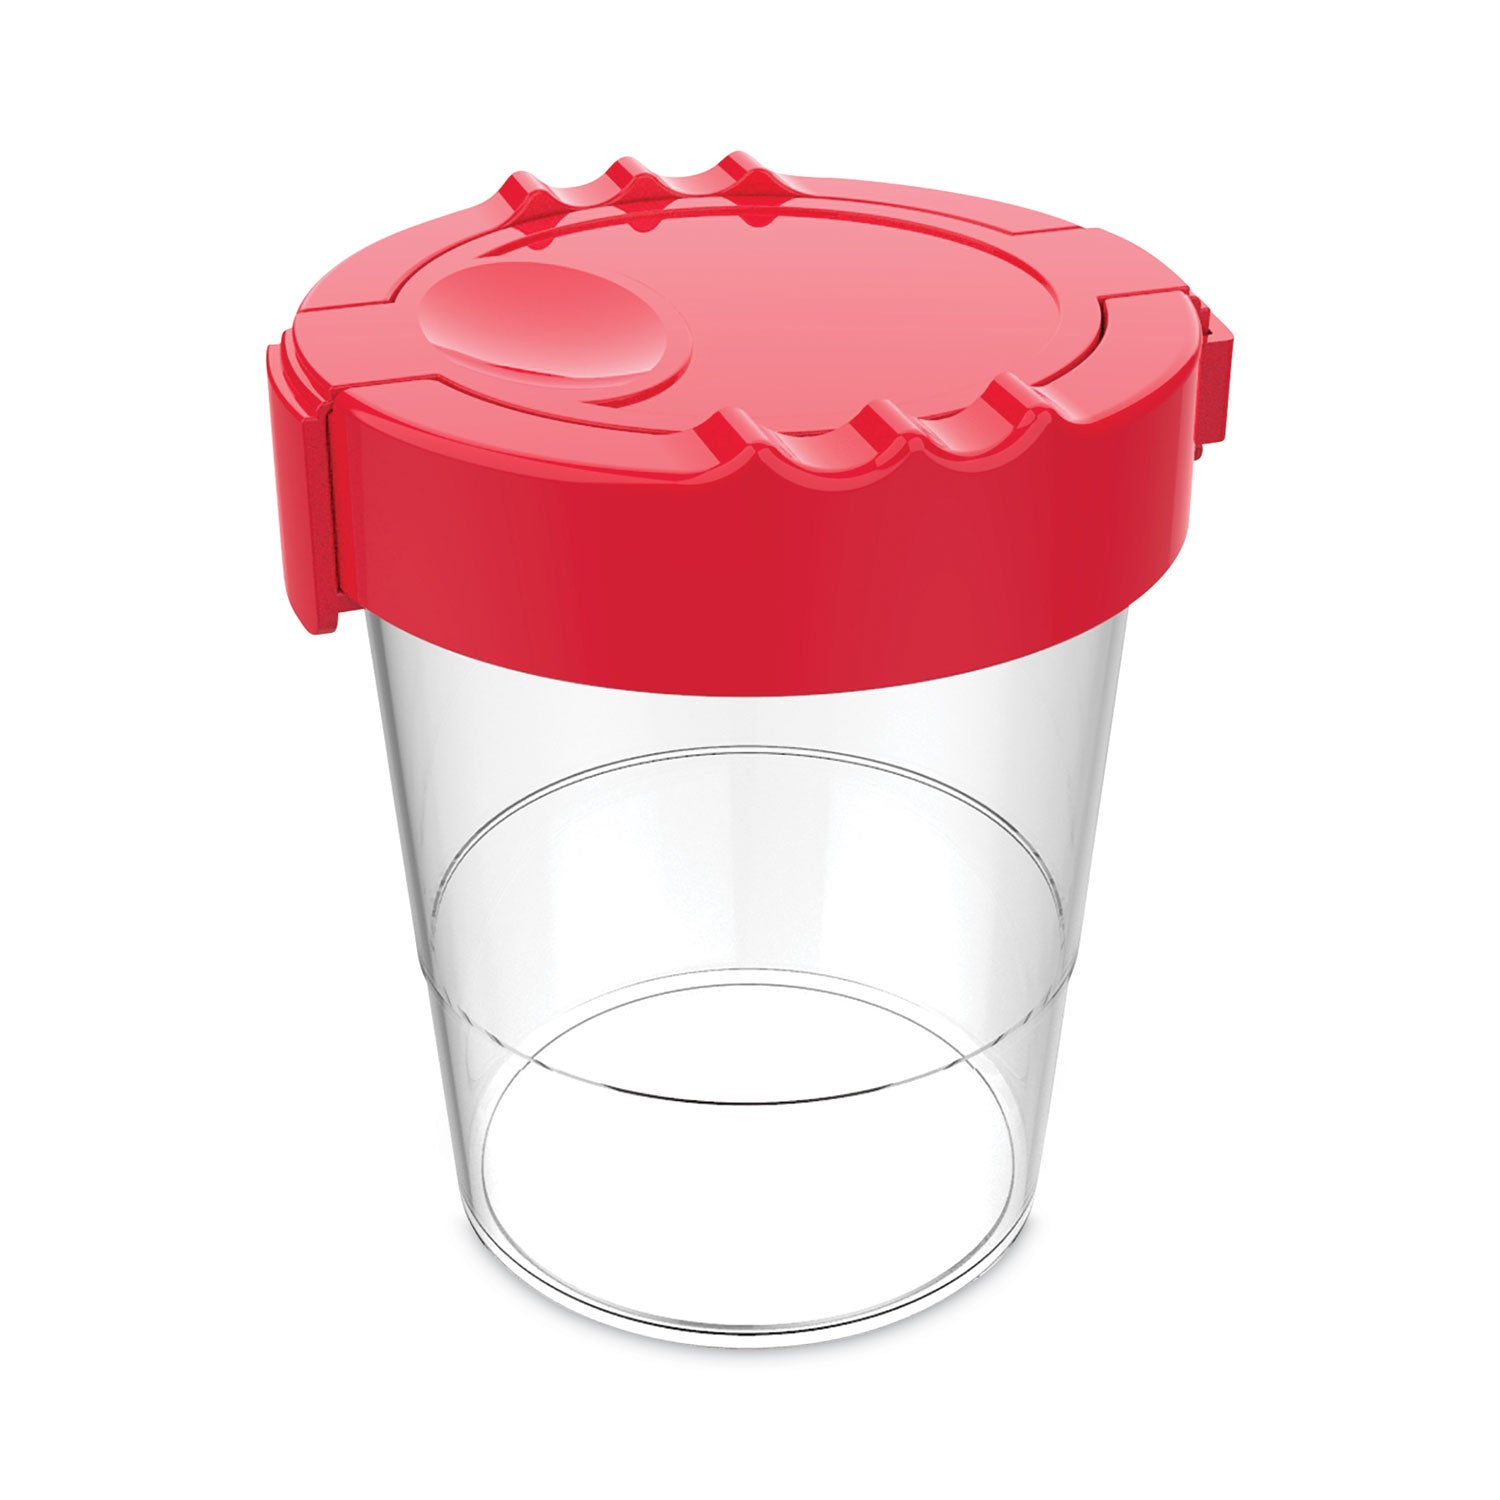 antimicrobial-no-spill-paint-cup-346-w-x-393-h-red_def39515red - 1